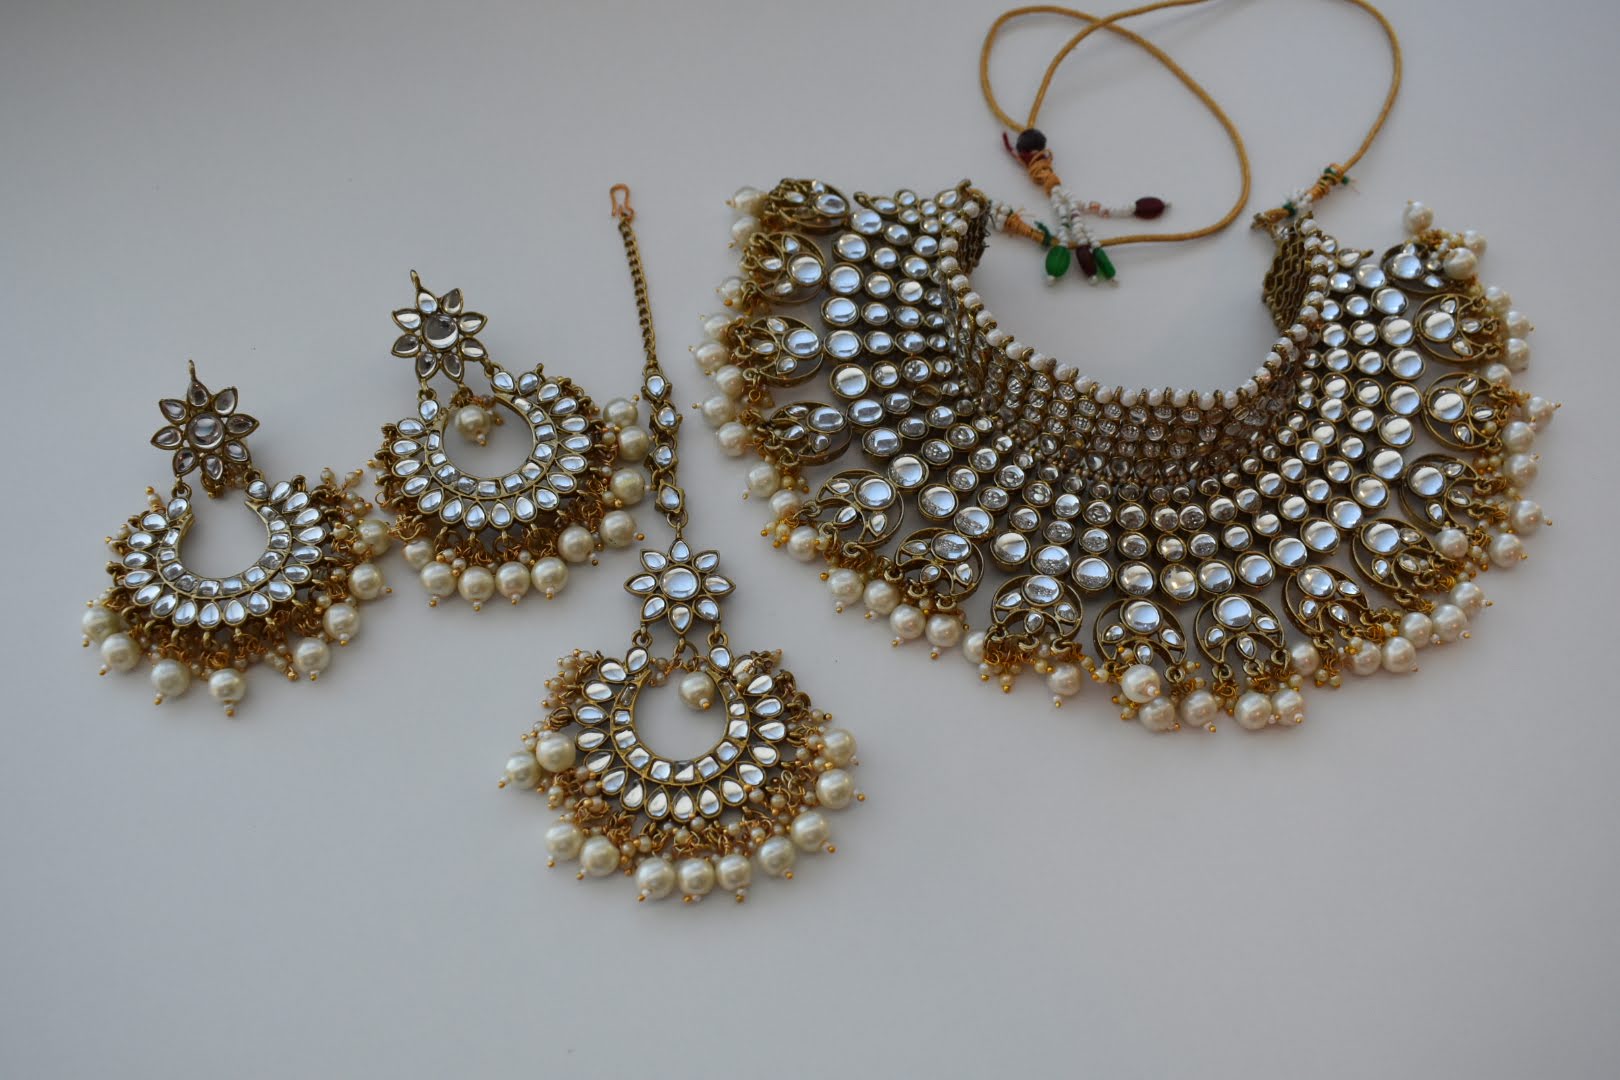 Kundan Beads - Faux Pearls- Light Gold Metal Color- Thin Neck Choker Necklace Set